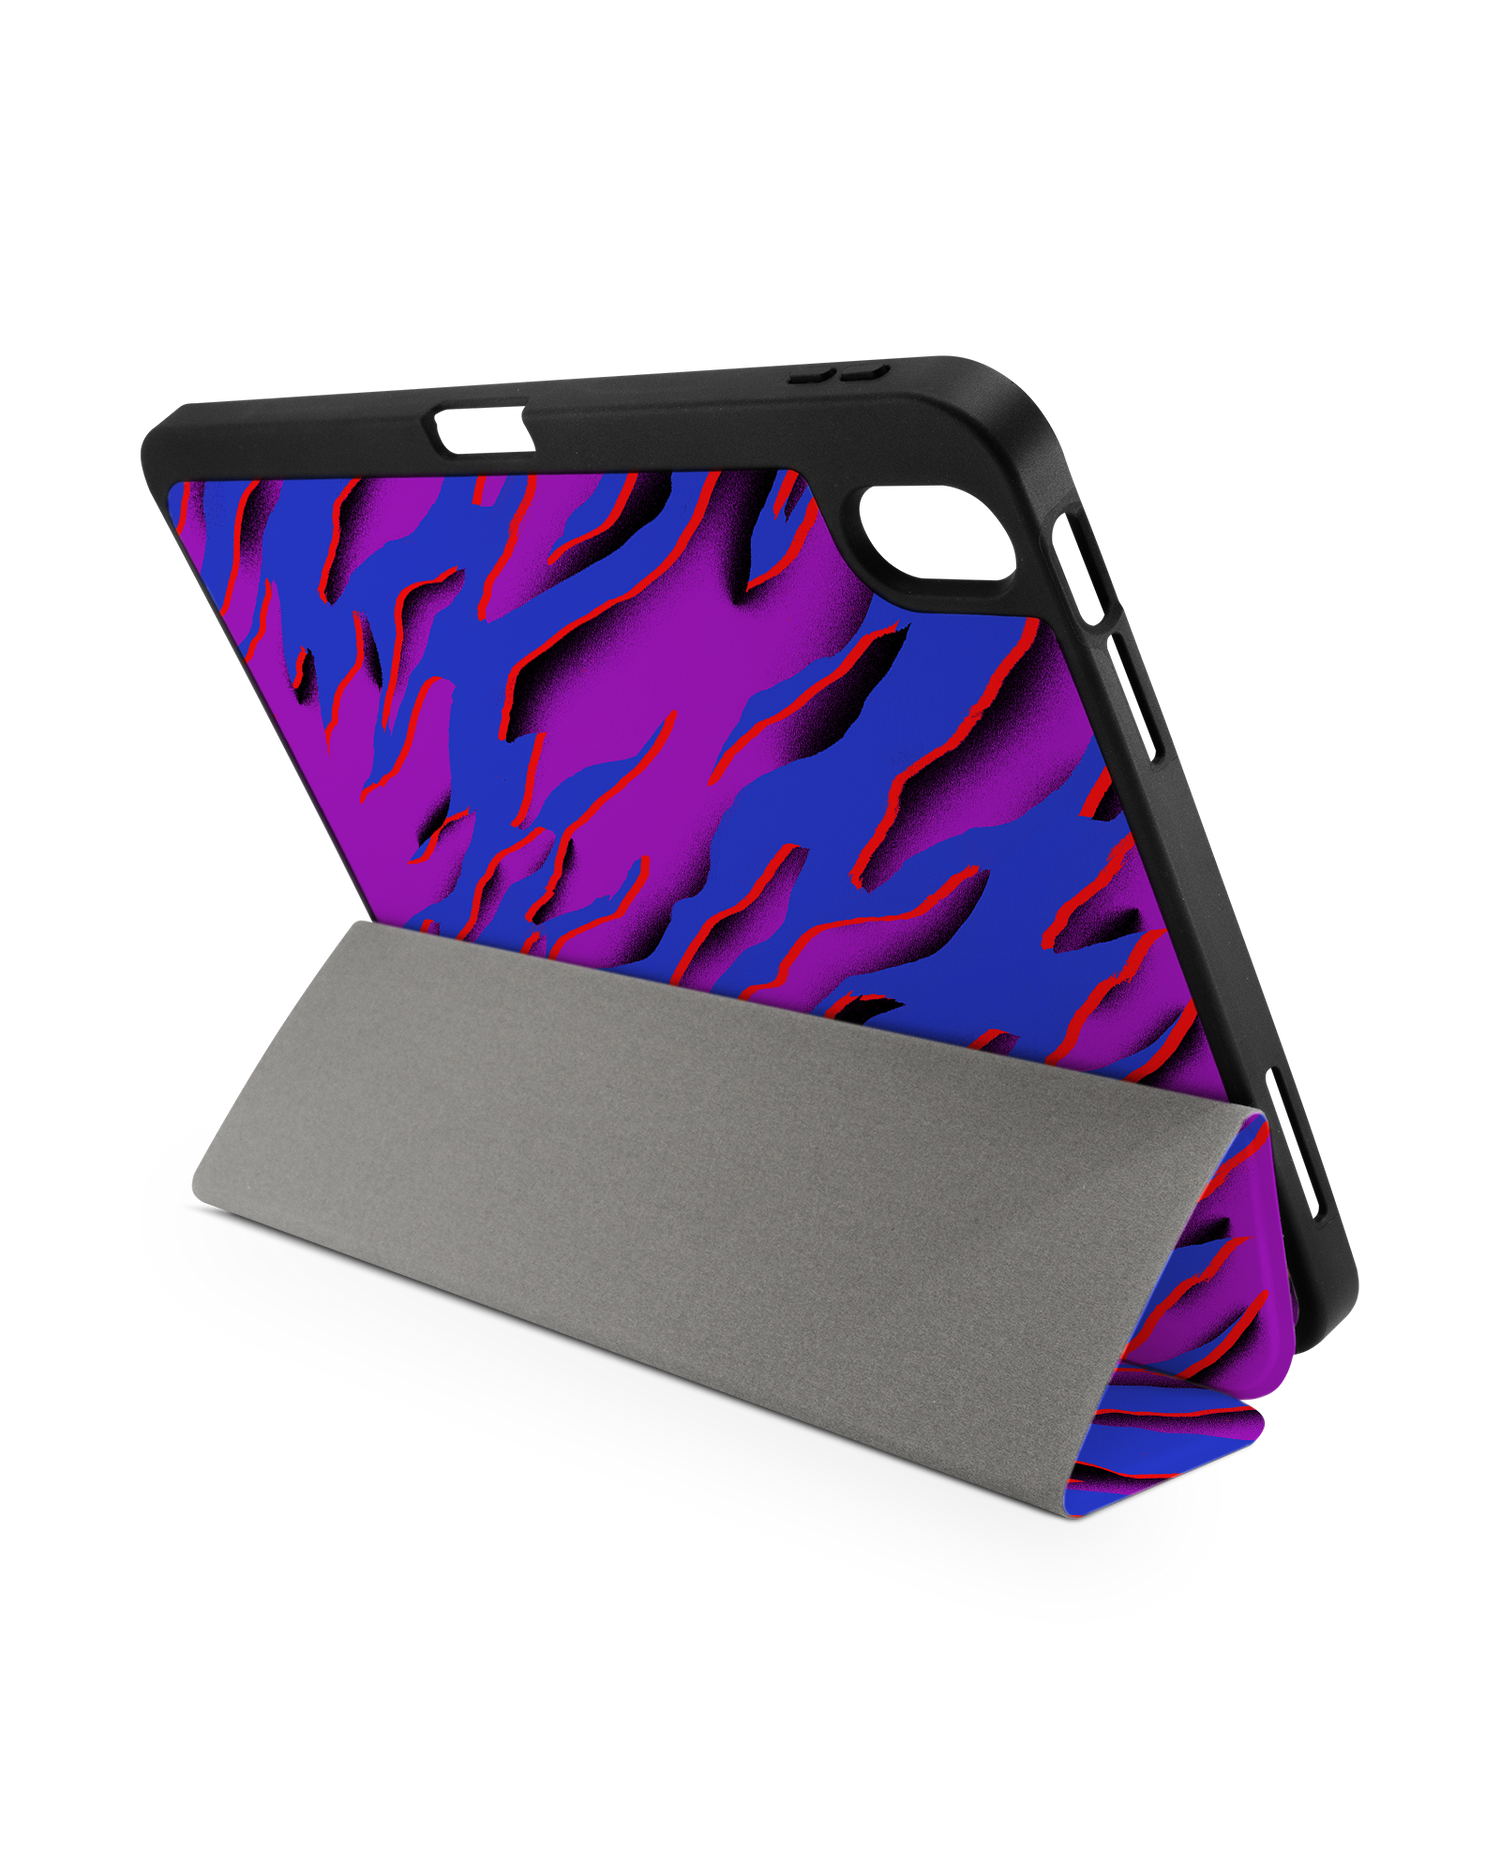 Electric Ocean 2 iPad Case with Pencil Holder for Apple iPad (10th Generation): Set up in landscape format (back view)